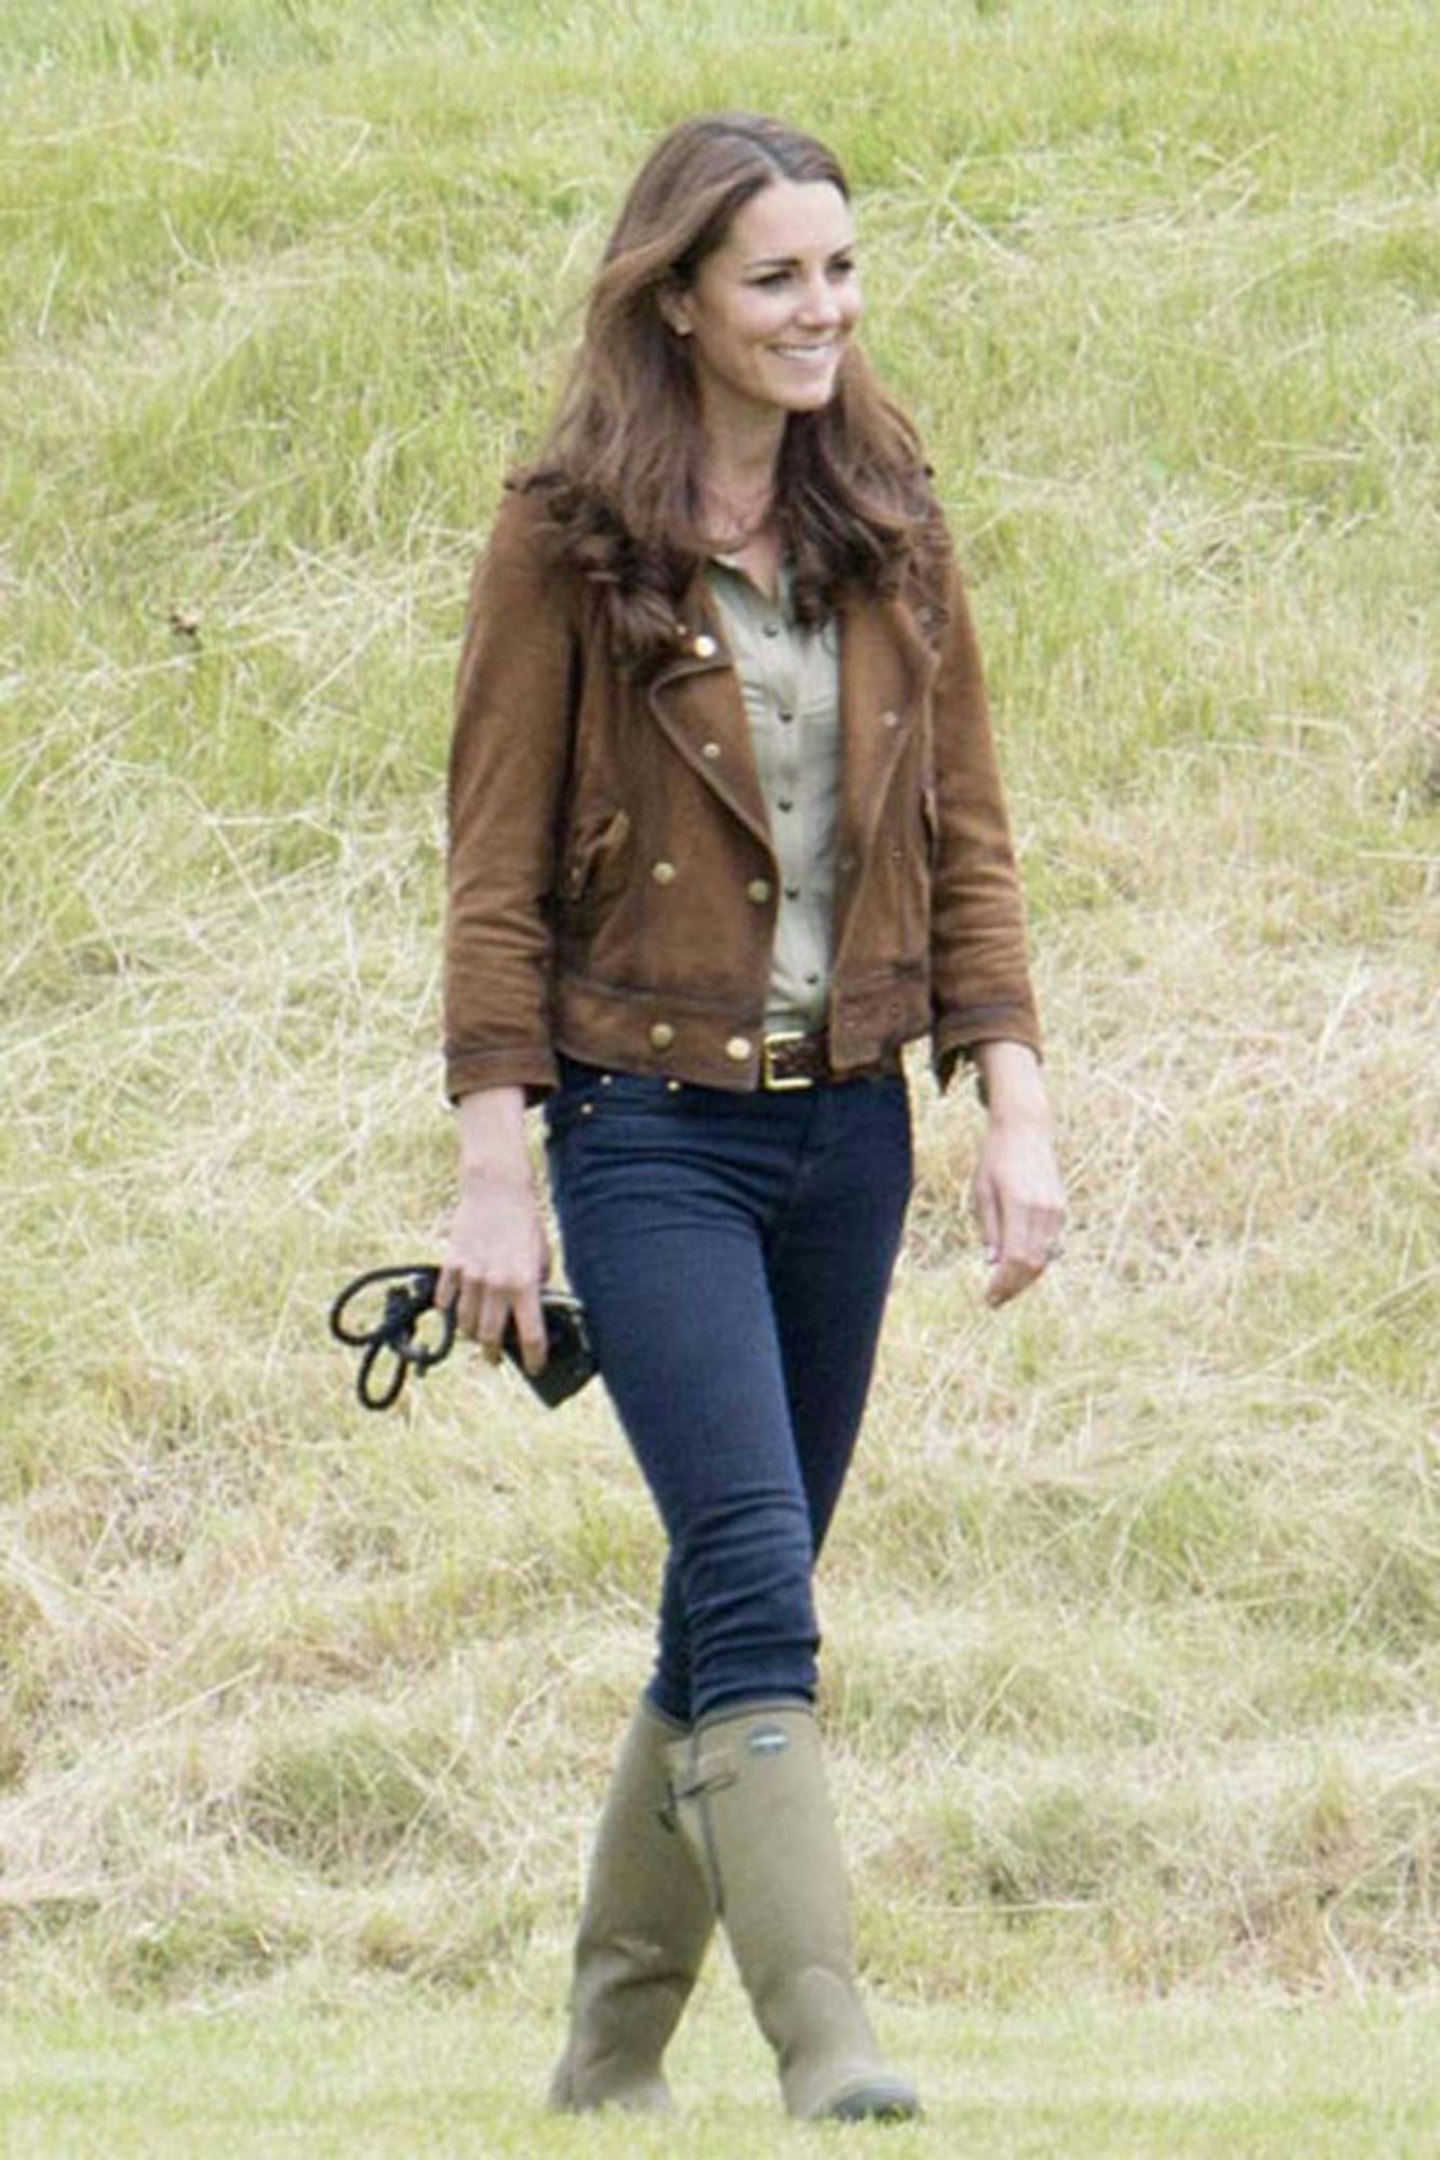 Kate Middleton at Beaufort Polo Club, Gloucestershire, June 2012